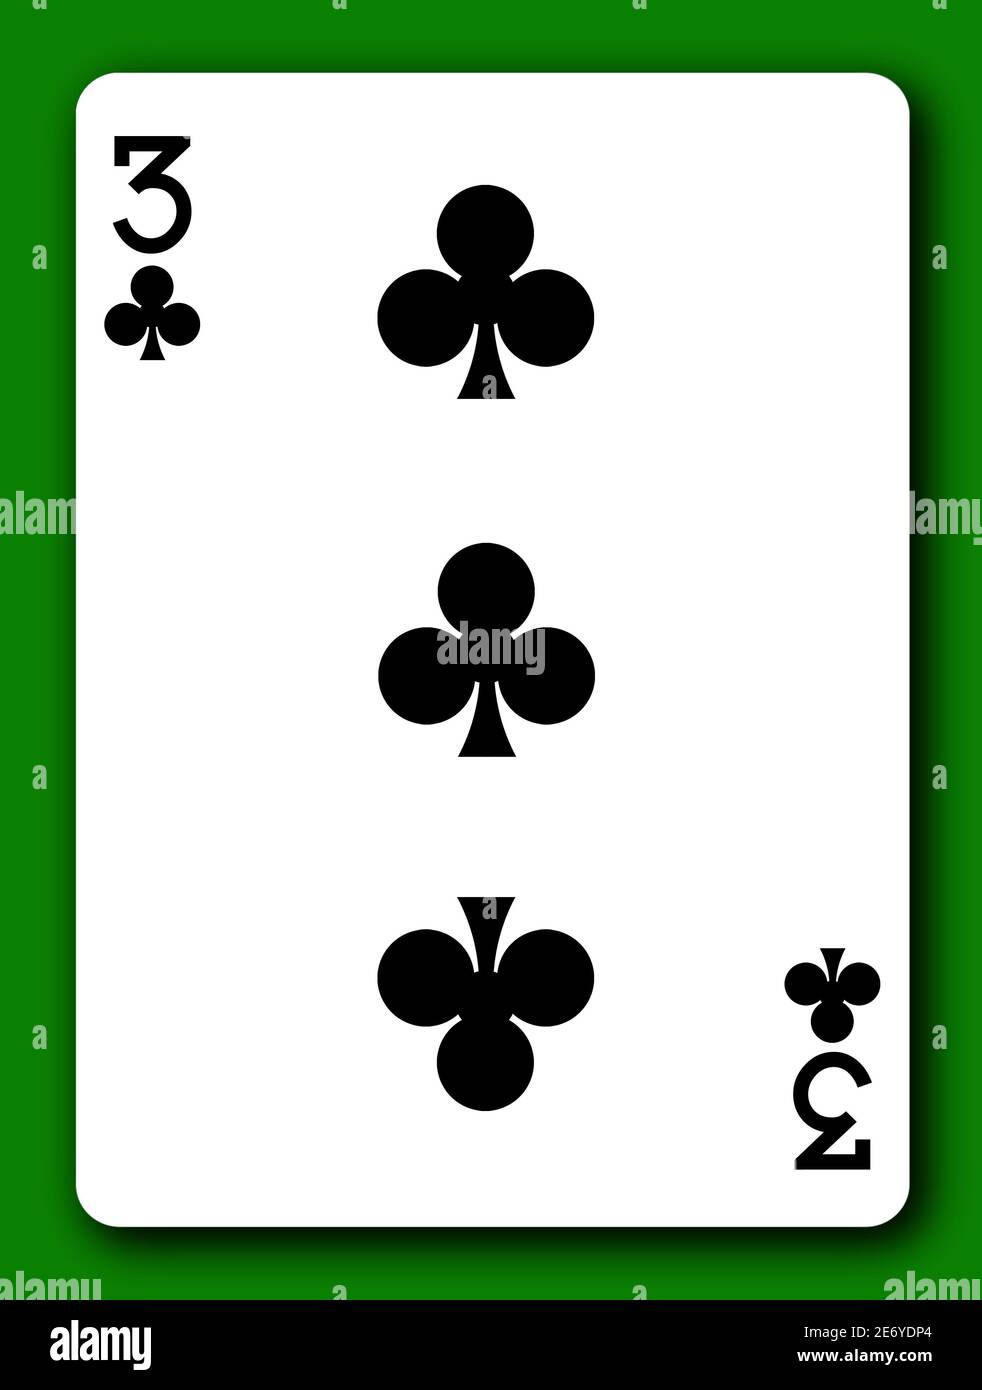 3 Three of Clubs playing card with clipping path to remove background and  shadow 3d illustration Stock Photo - Alamy